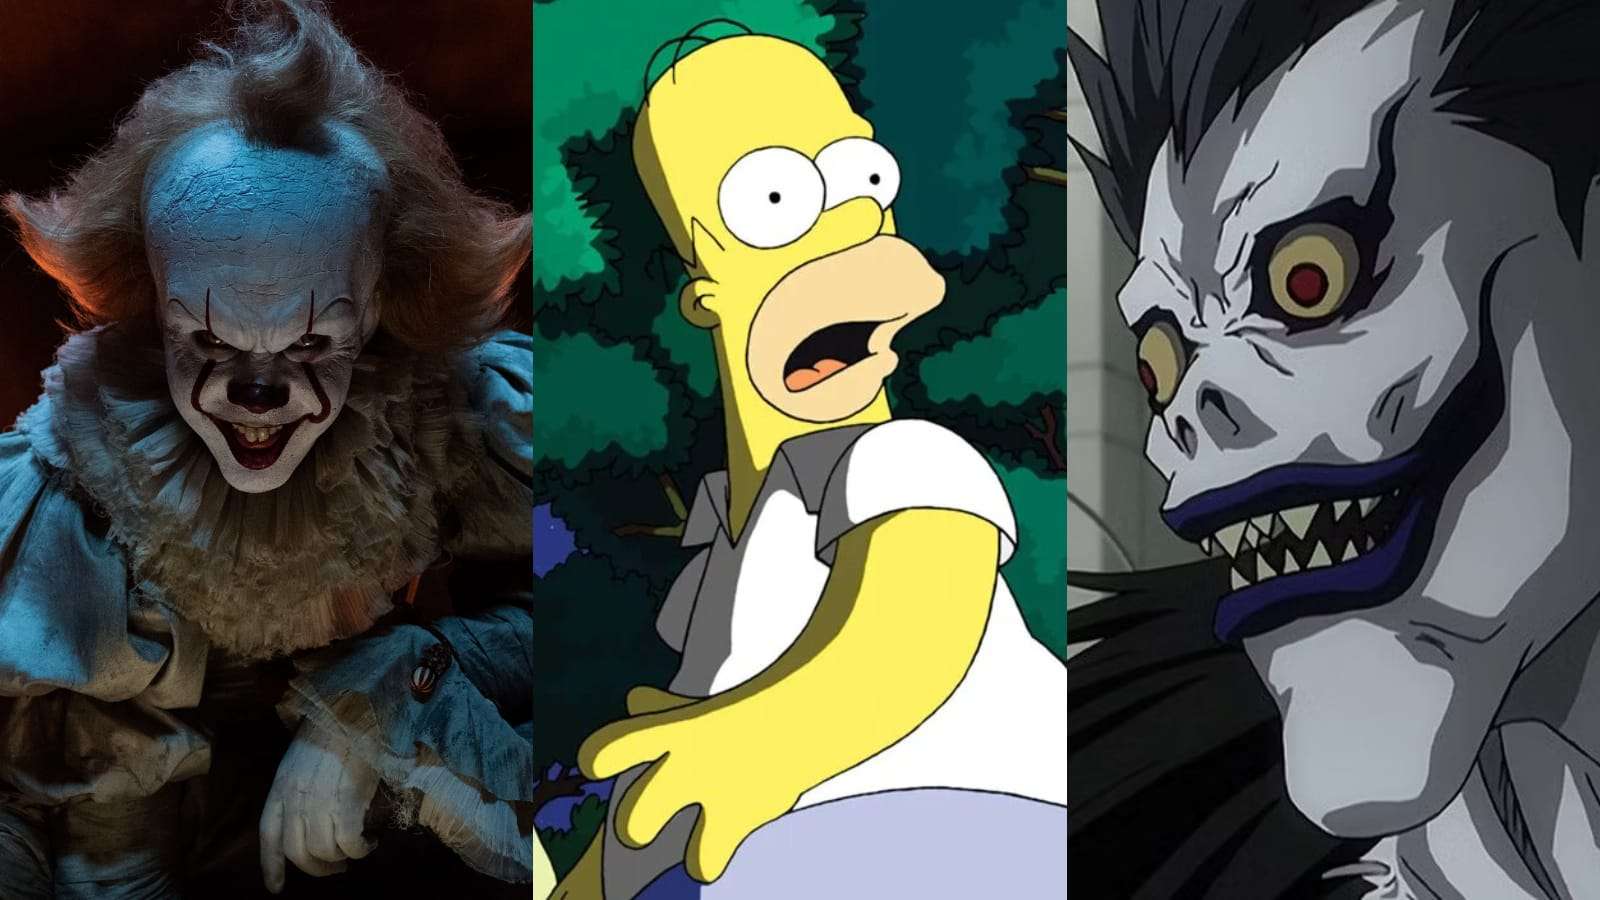 Images from It, The Simpsons and Death Note